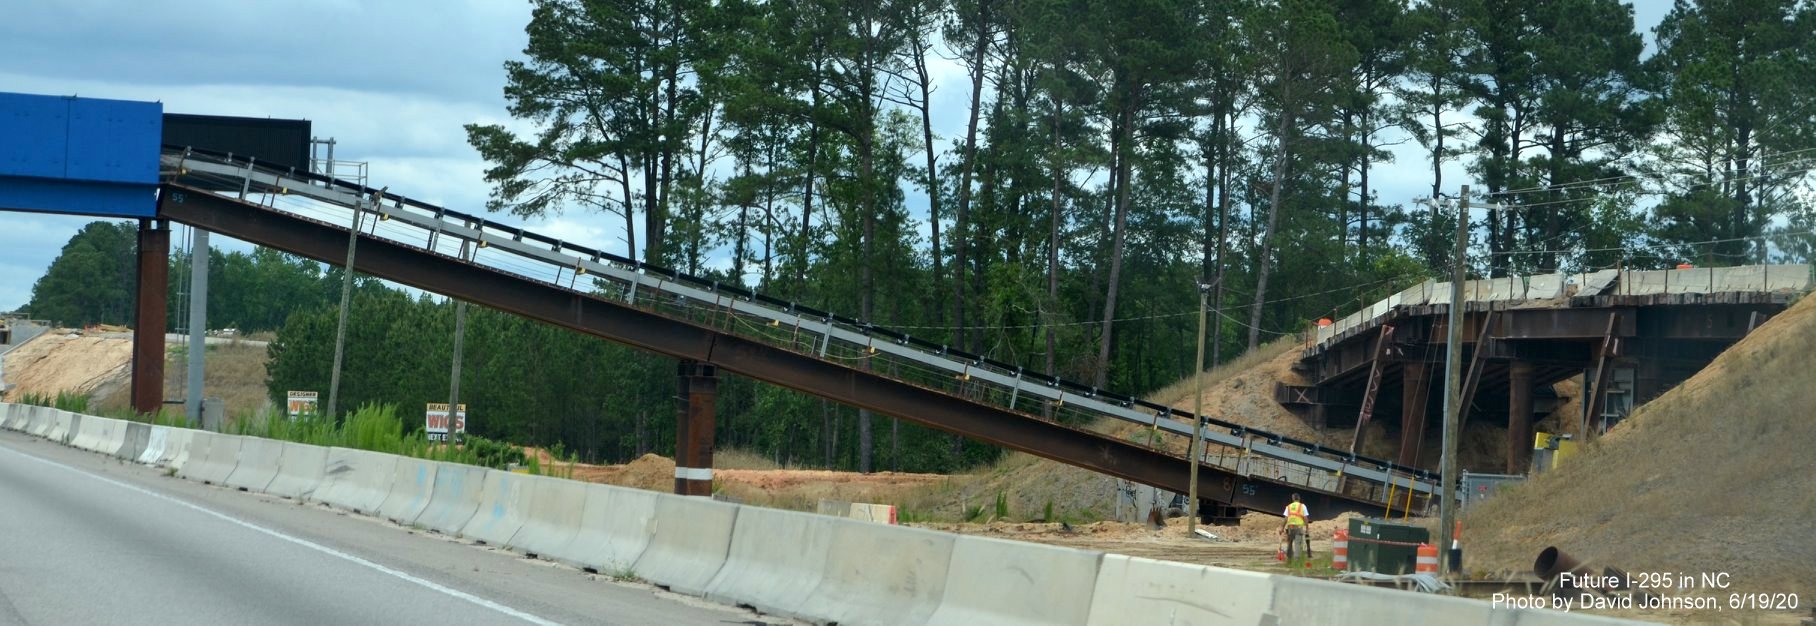 View of conveyor belt for dirt being carried across I-95 from besides northbound lanes at site of 
        future I-295 interchange near Hope Mills, by David Johnson June 2020